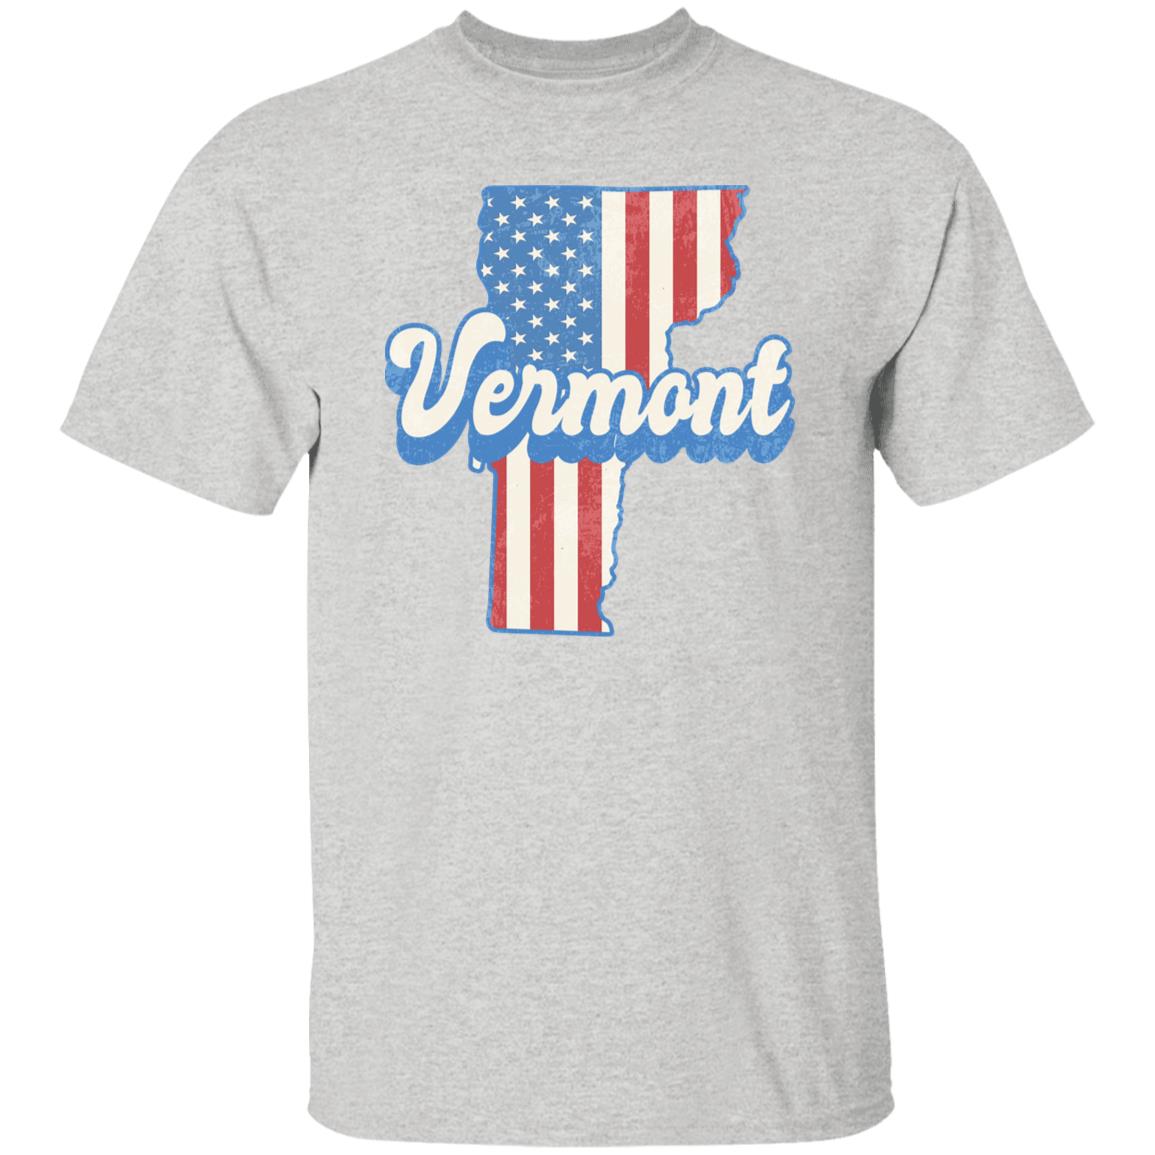 Vermont US flag Unisex T-Shirt American patriotic VT state tee White Ash Blue-Ash-Family-Gift-Planet